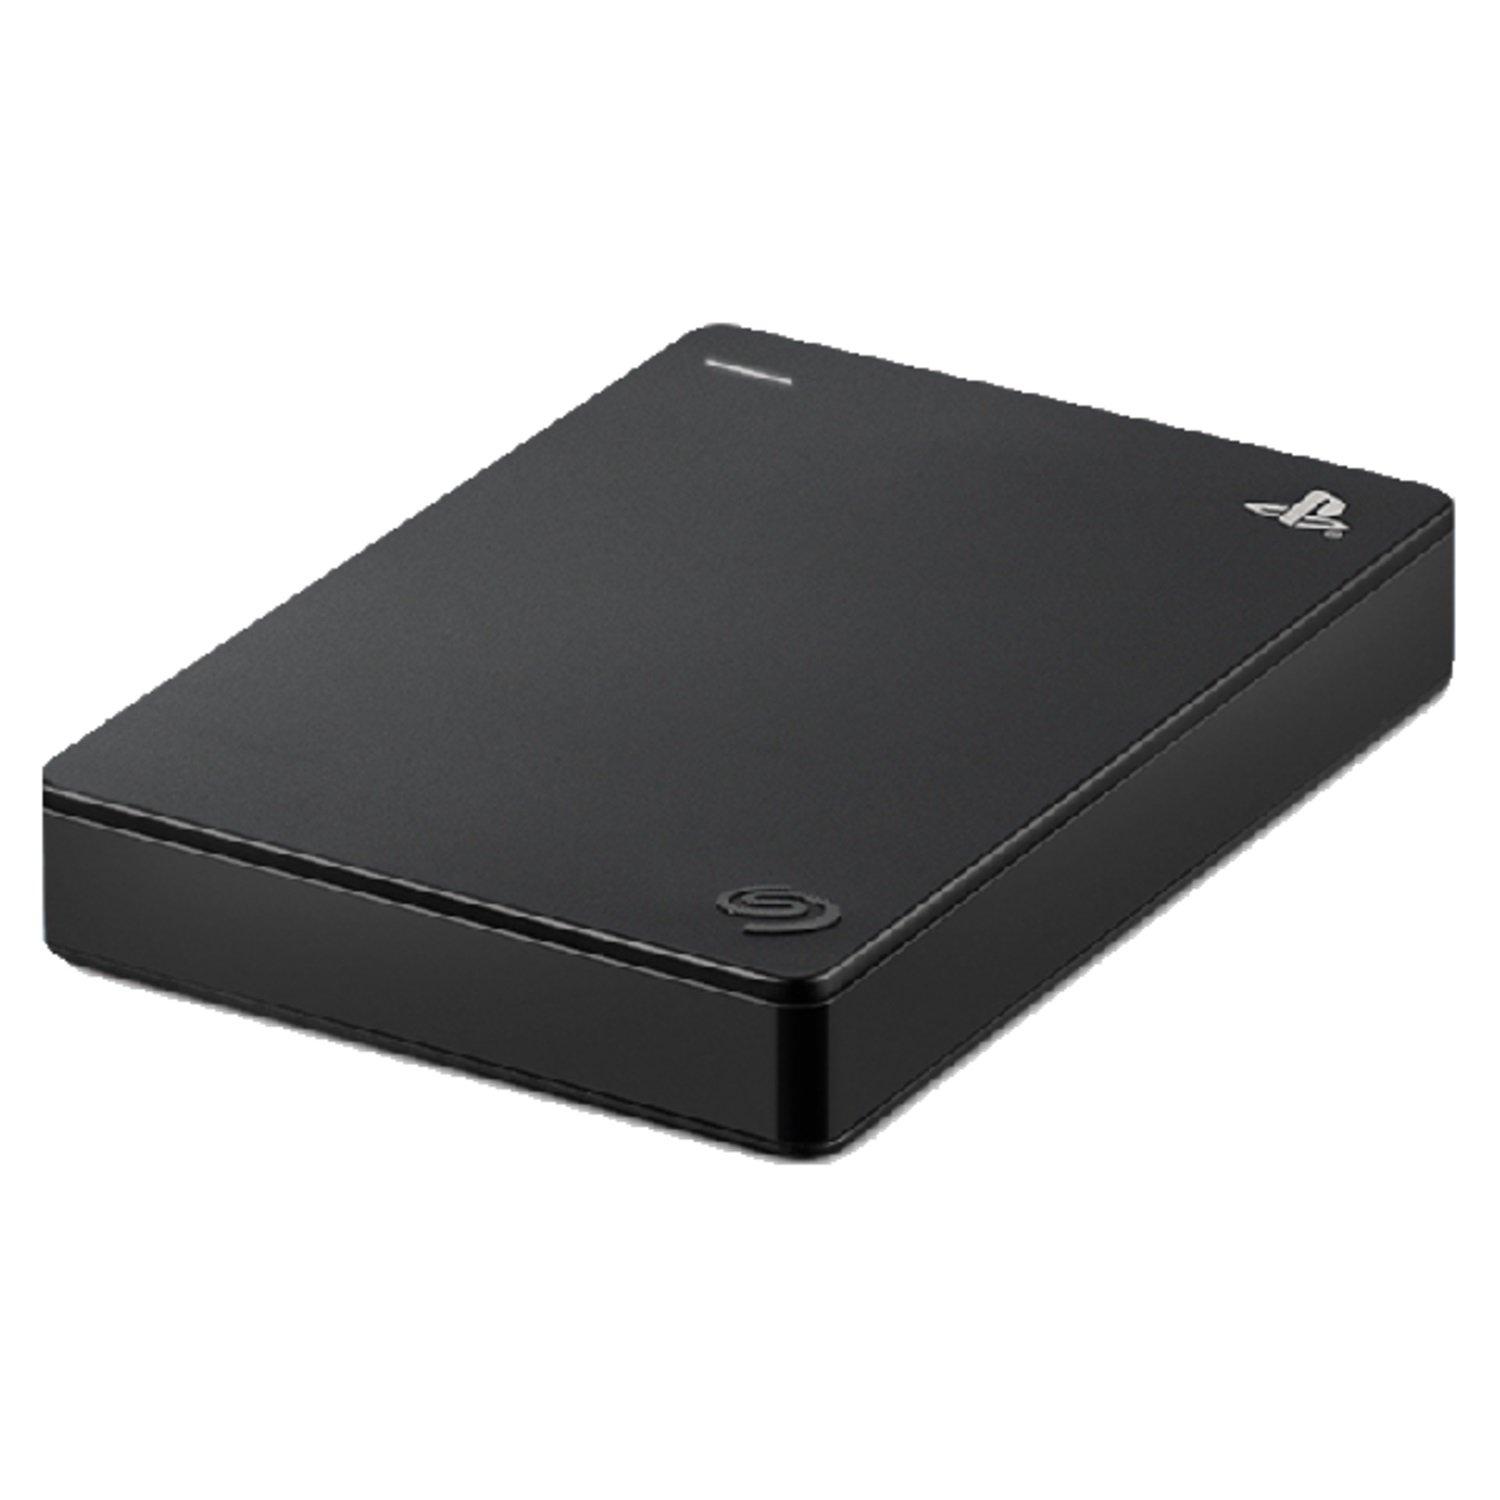 Seagate Drive External Hard Drive for PlayStation | GameStop